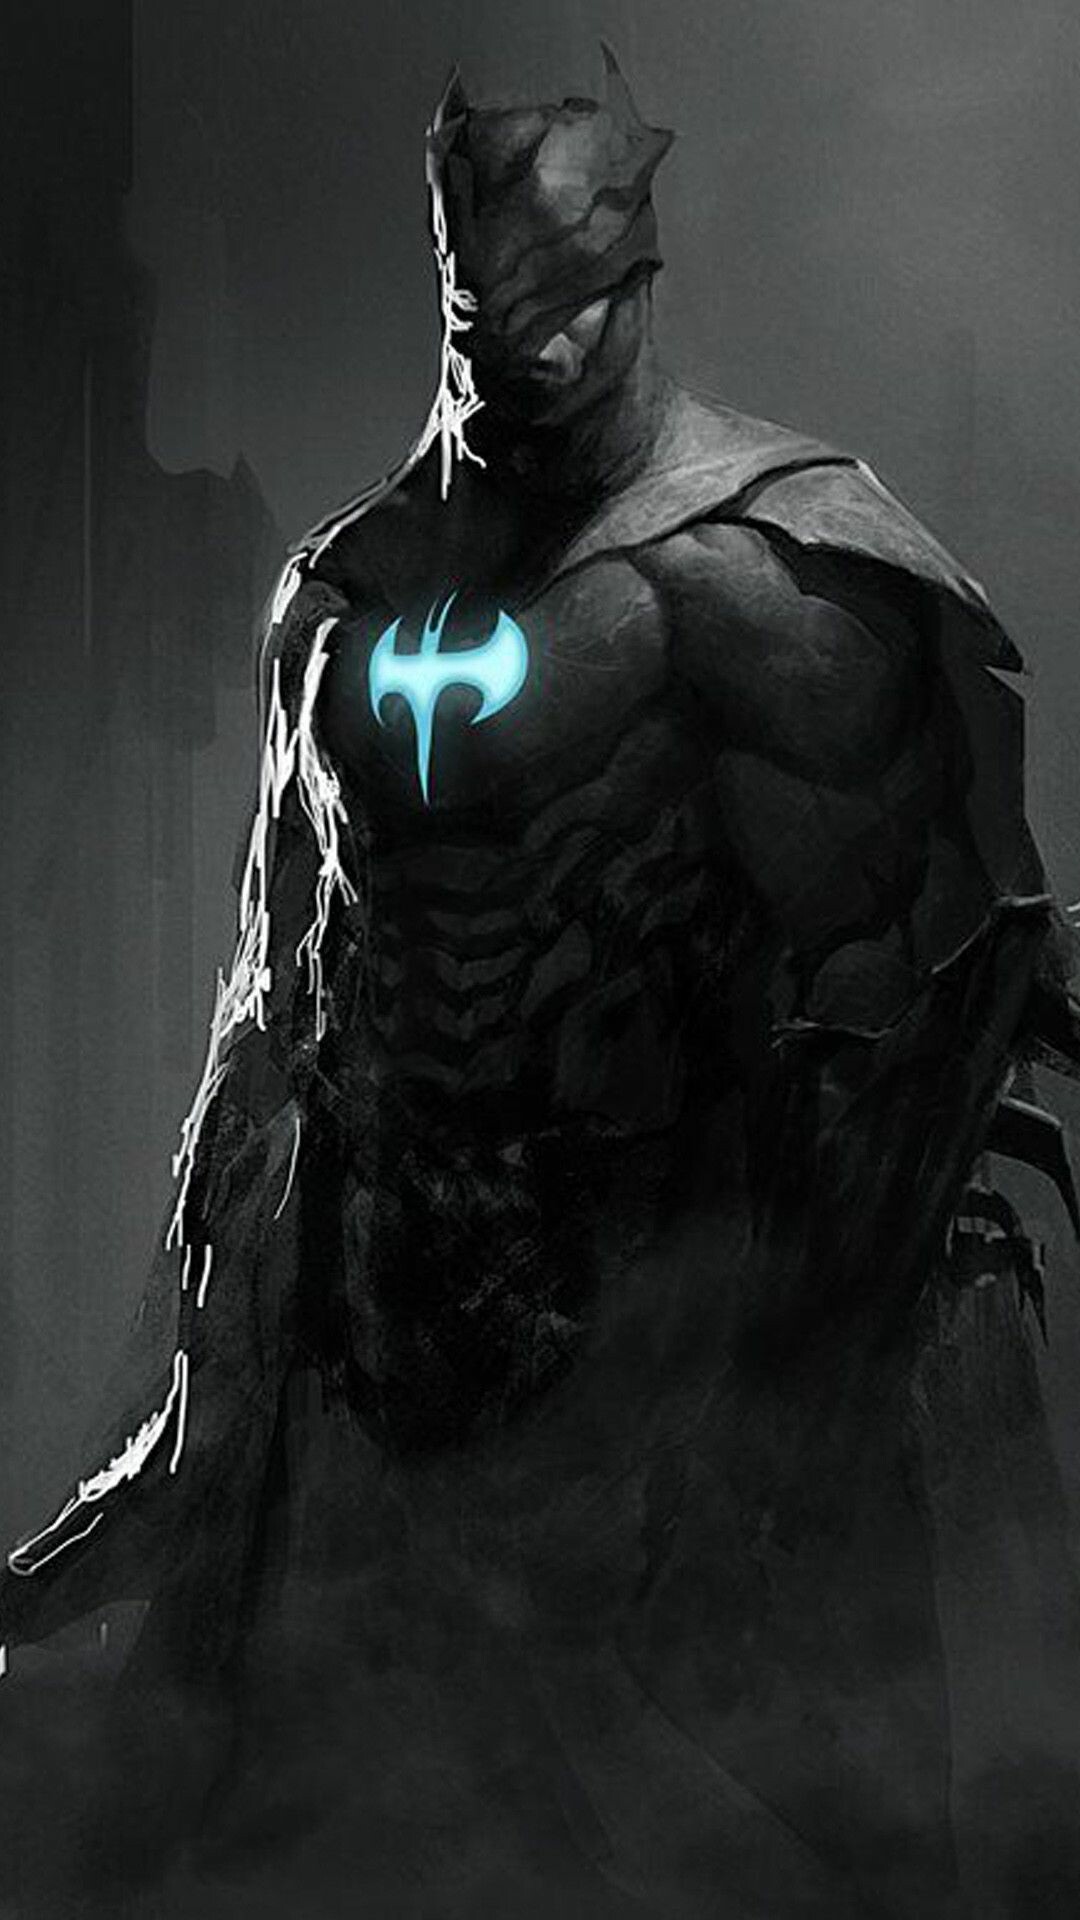 DOWNLOAD FOR FREE THIS AWESOME BATMAN HD WALLPAPER FOR MOBILE